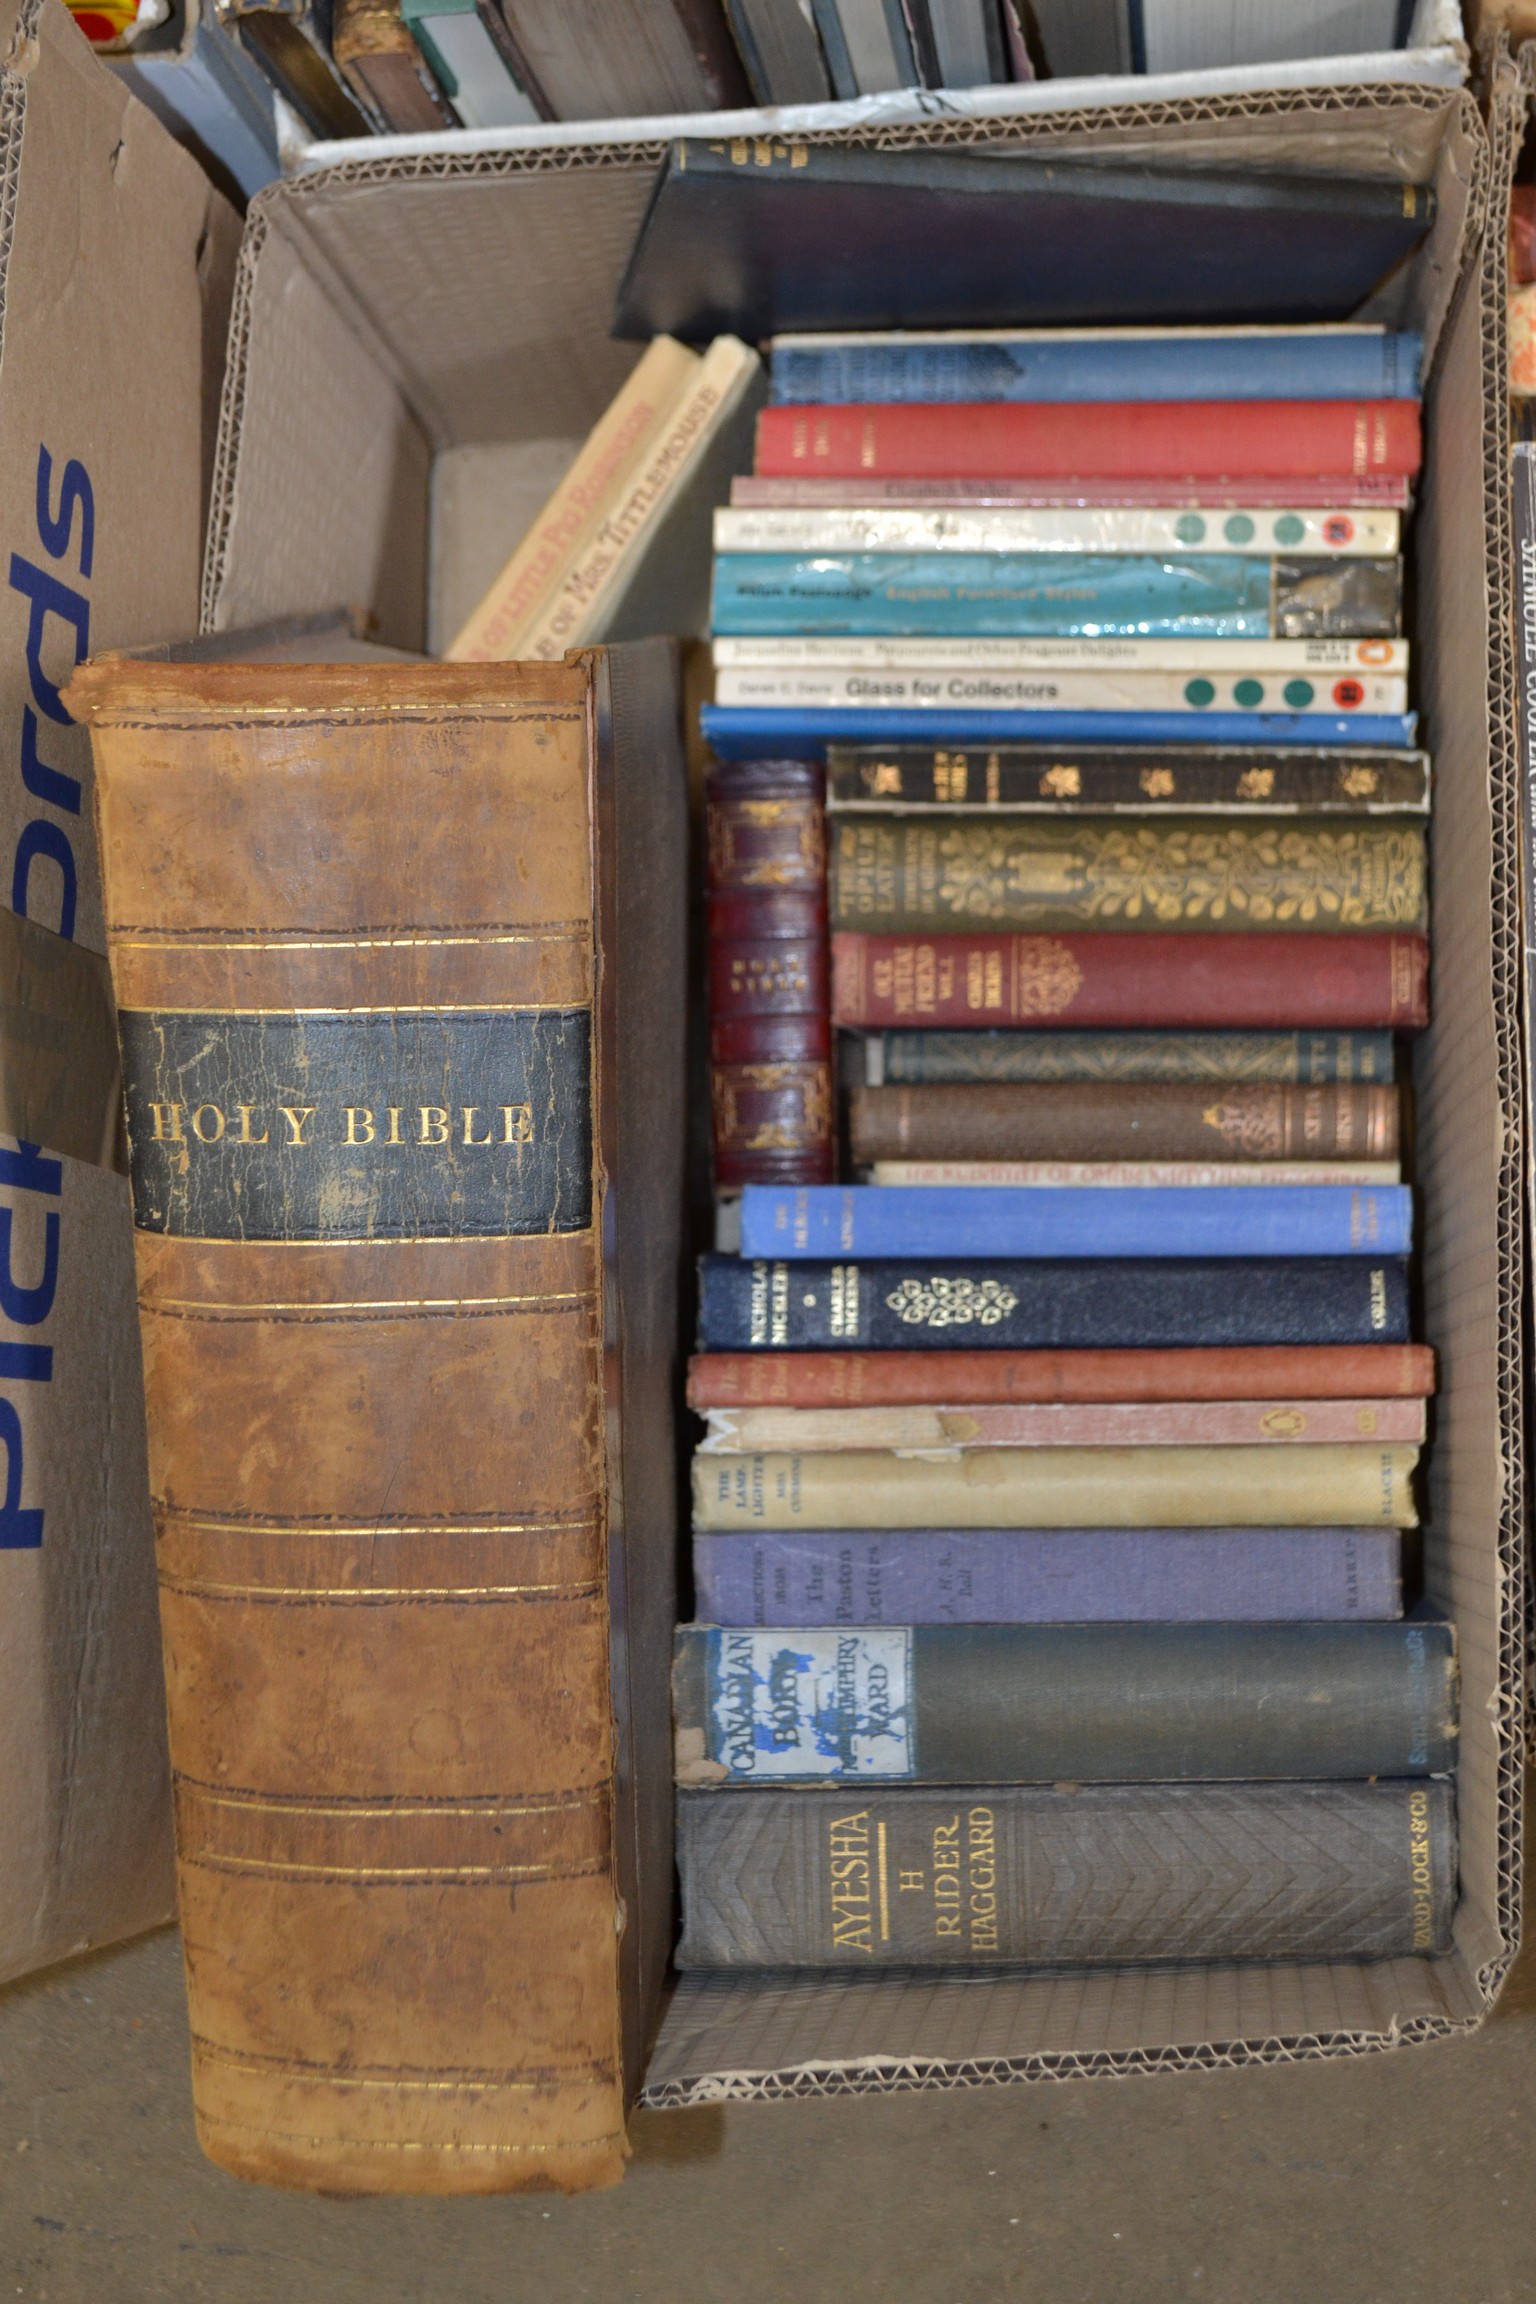 BOX OF MIXED BOOKS - HOLY BIBLE, THE OPIUM EATER, OUR MUTUAL FRIEND ETC